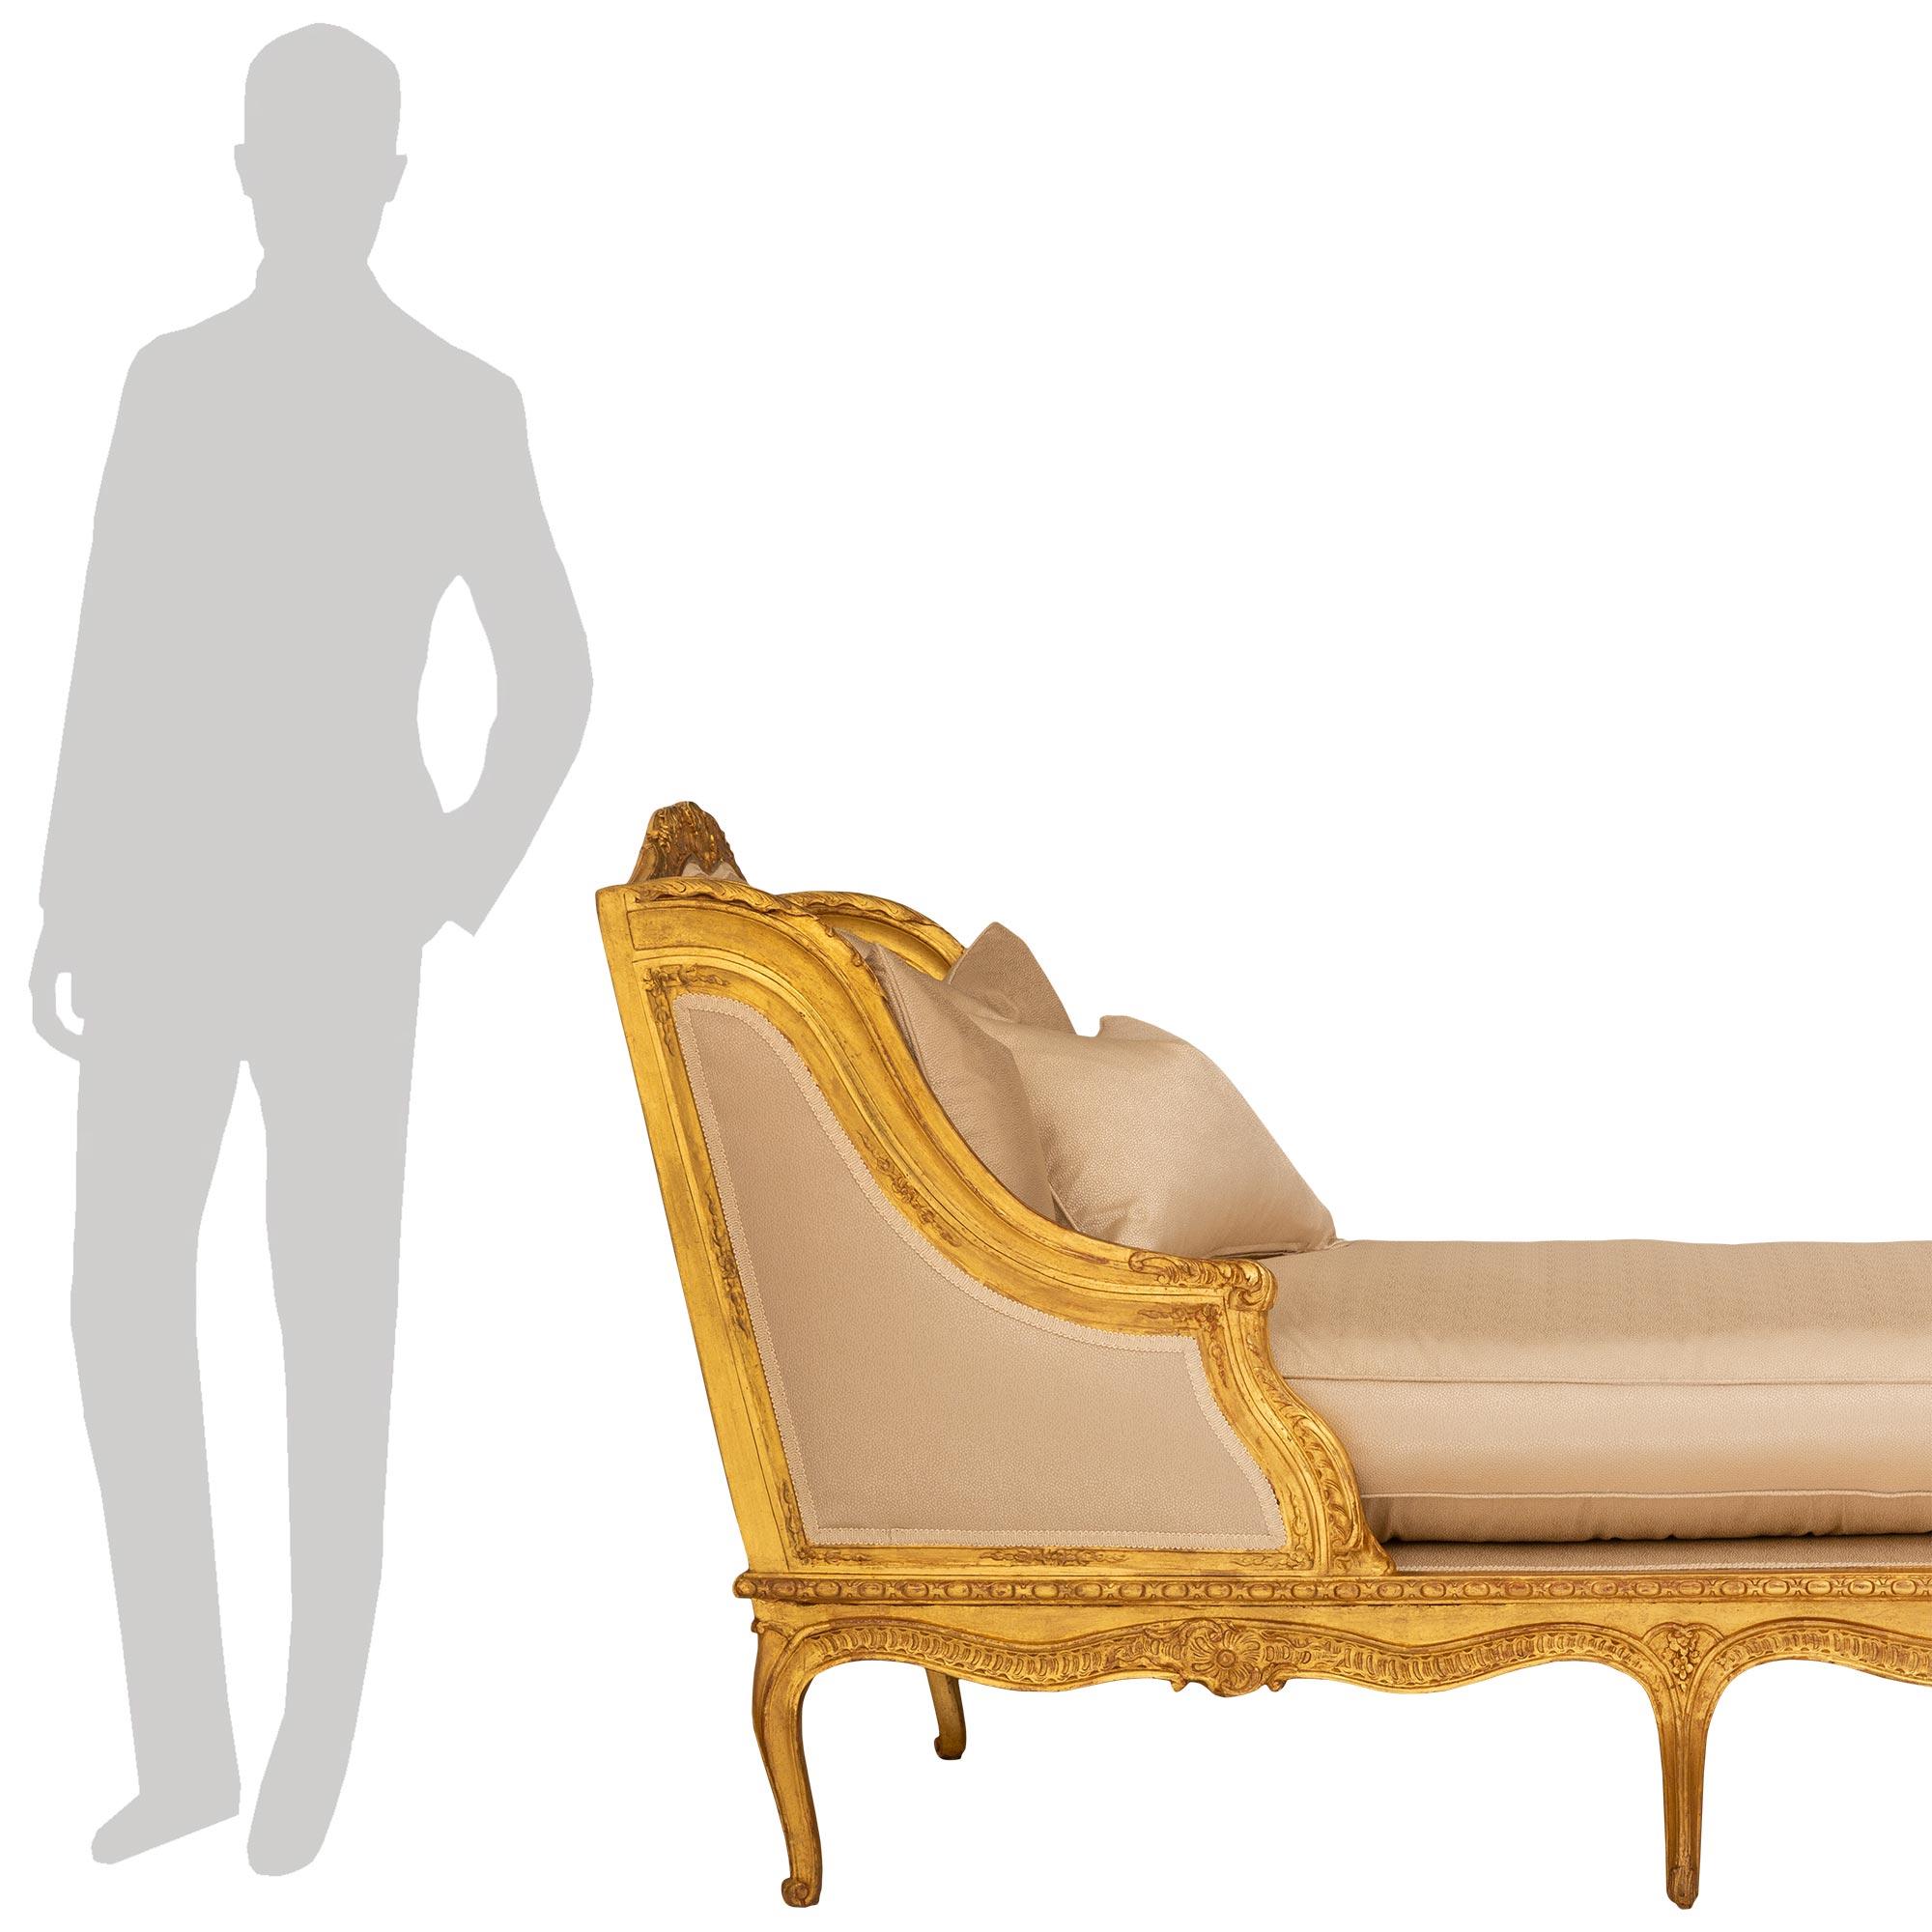 



An exceptional and most unique French early 19th century Regence st. giltwood Récamier chaise. The chaise is raised by six elegant cabriole legs with top carvings of flowers and the scalloped shaped apron displays a central Rocaille reserve